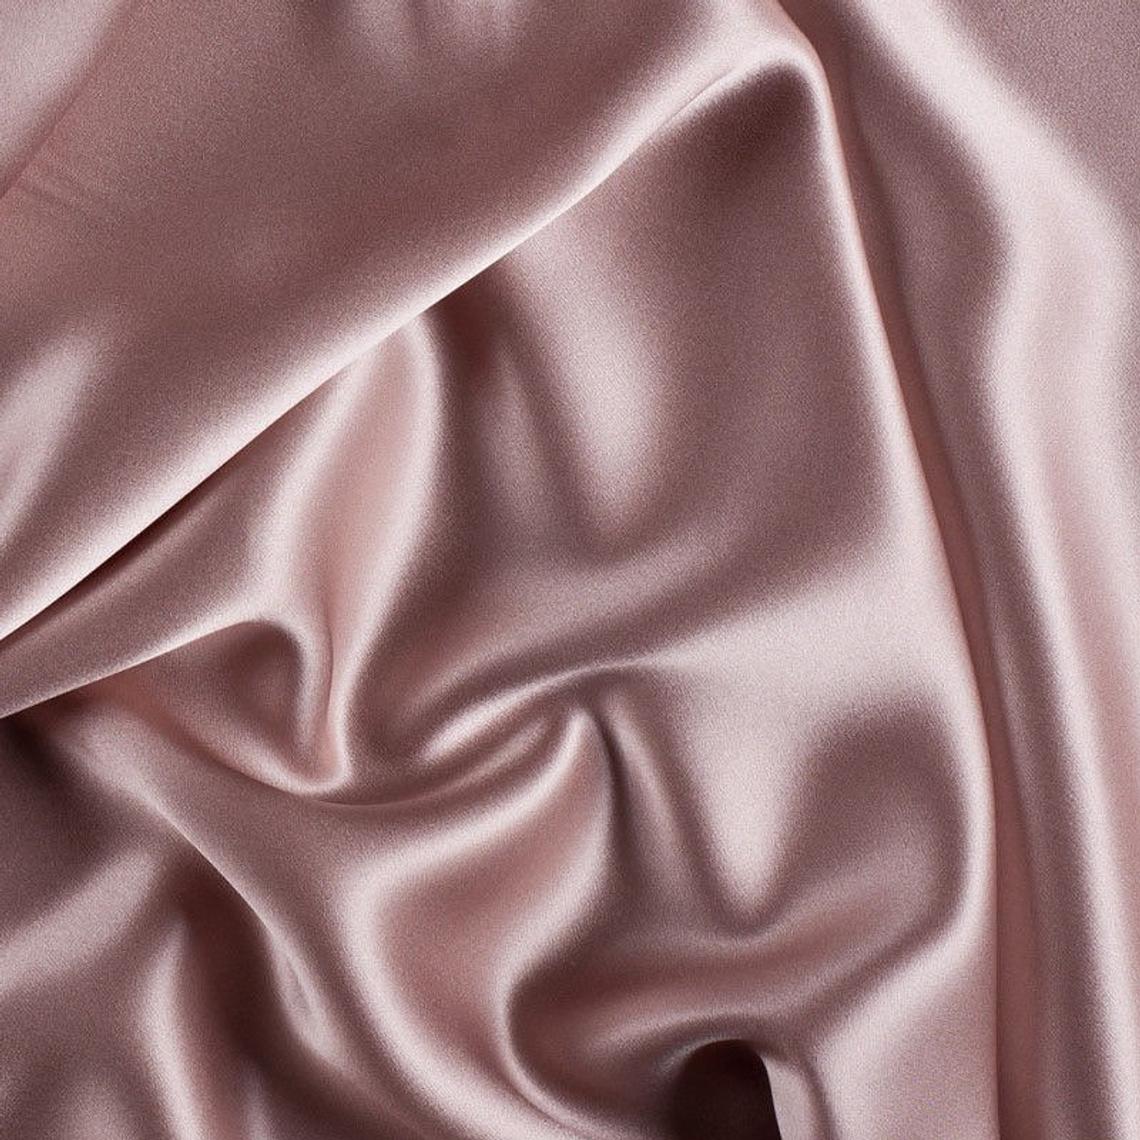 Silky Charmeuse Stretch Satin Fabric By The Roll(25 yards) Wholesale FabricSatin FabricICEFABRICICE FABRICSDusty RoseBy The Roll (60" Wide)Silky Charmeuse Stretch Satin Fabric By The Roll(25 yards) Wholesale Fabric ICEFABRIC